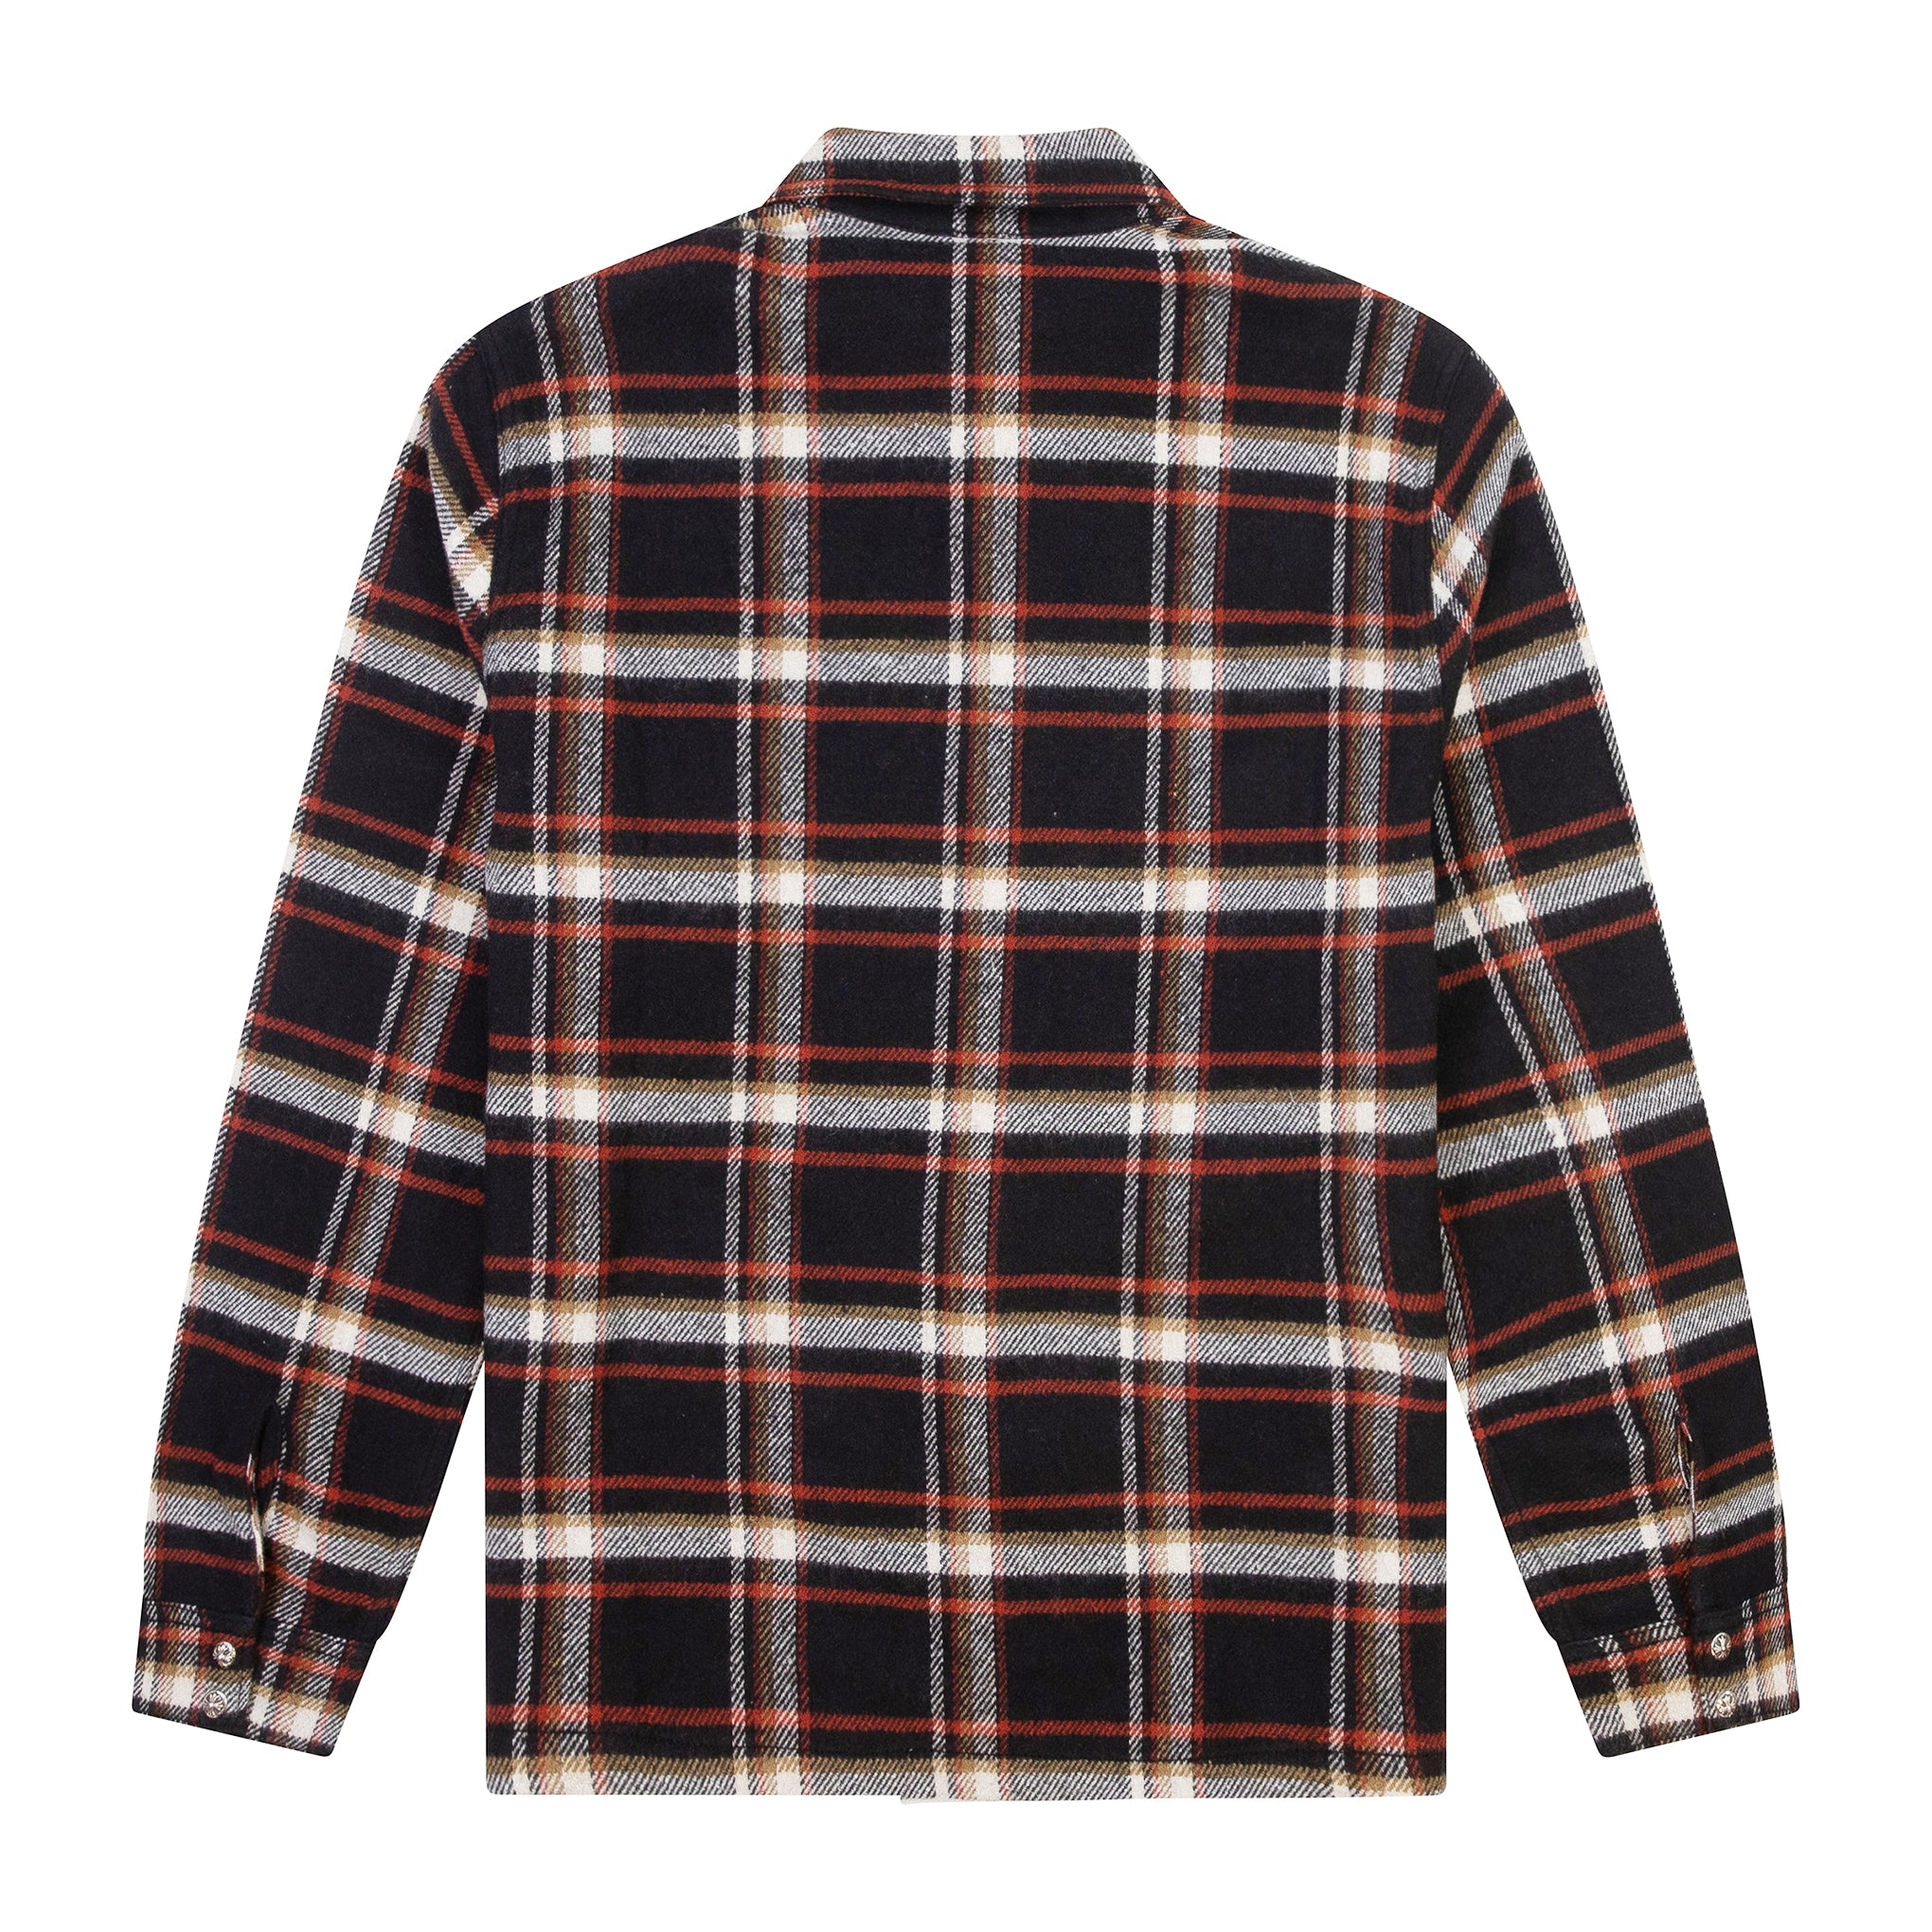 CHROME HEARTS FLANNEL BLACK RED